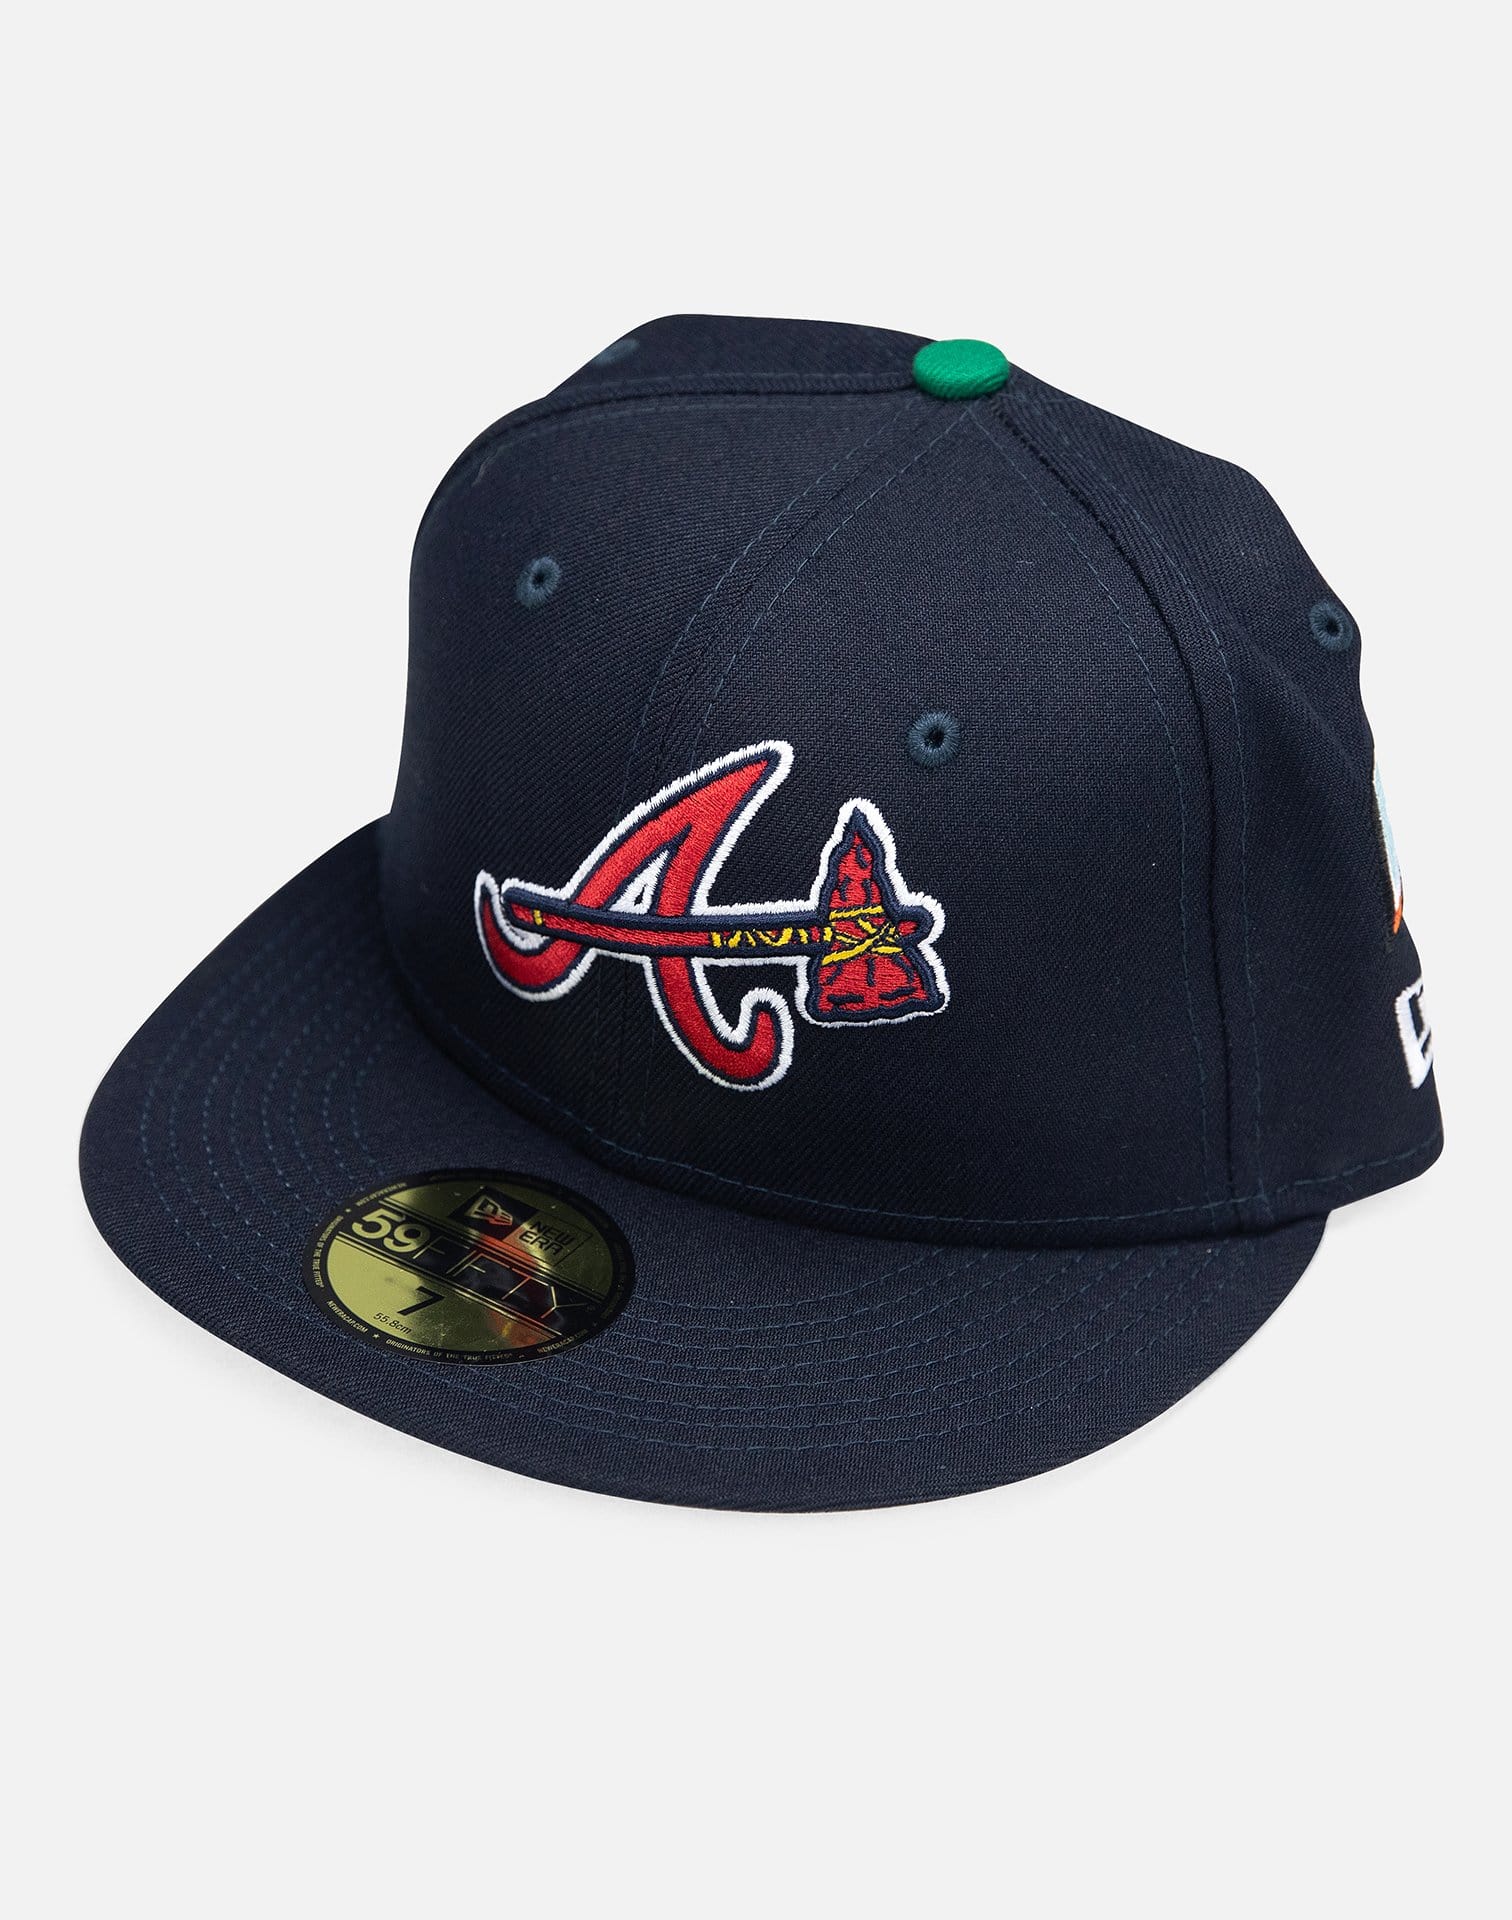 The Atlanta Braves x Offset @neweracap Collection is available